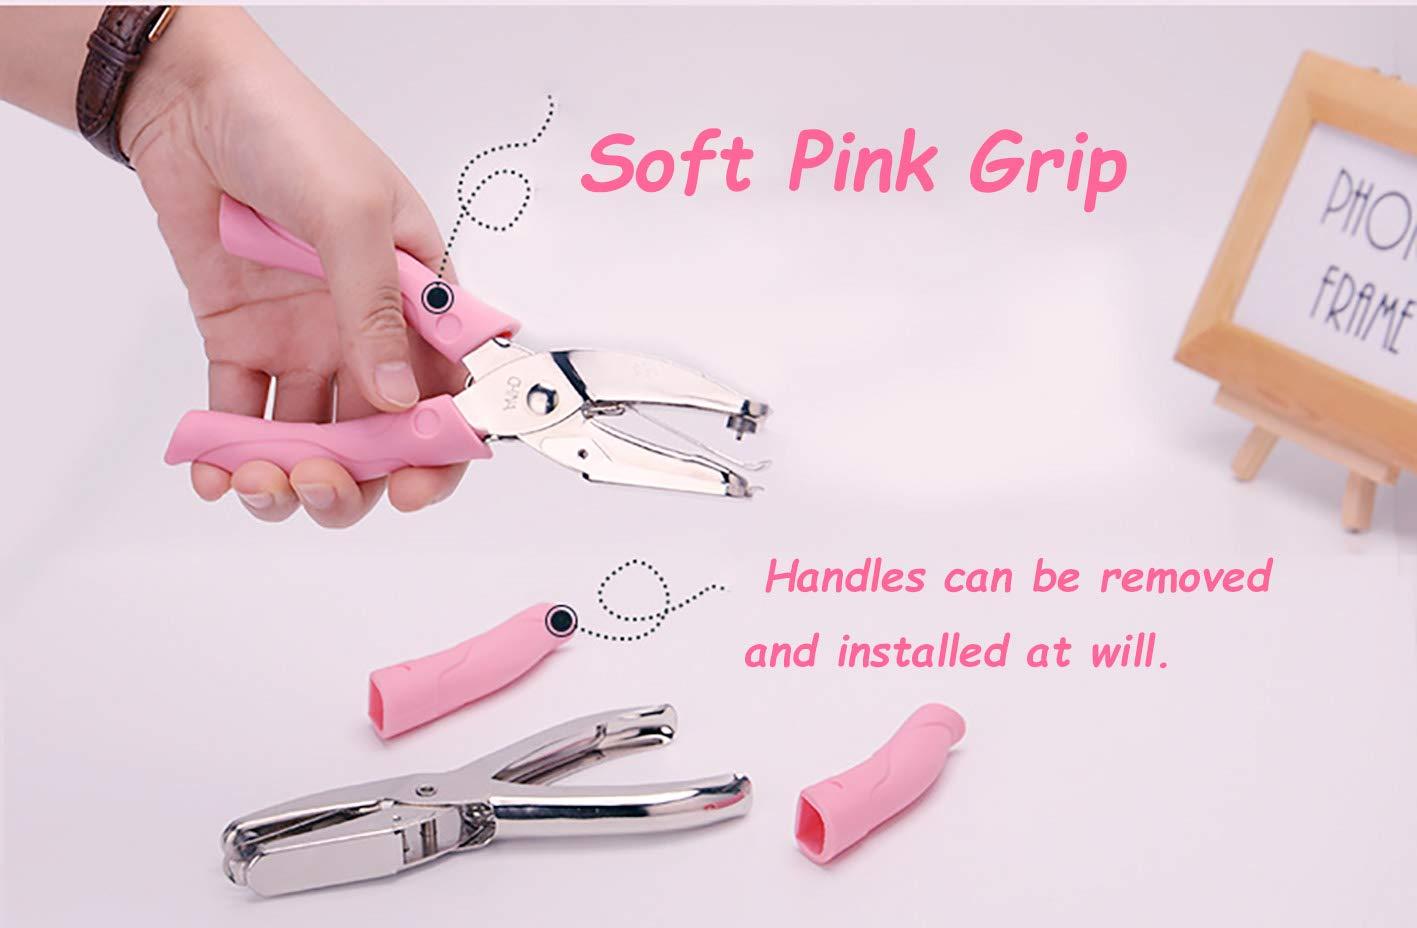 1 Pack 6.3 Inch Length 1/8 Inch Diameter of Circle Hole Handheld Single  Paper Hole Punch, Puncher with Pink Soft Thick Leather Cover (Middle Circle